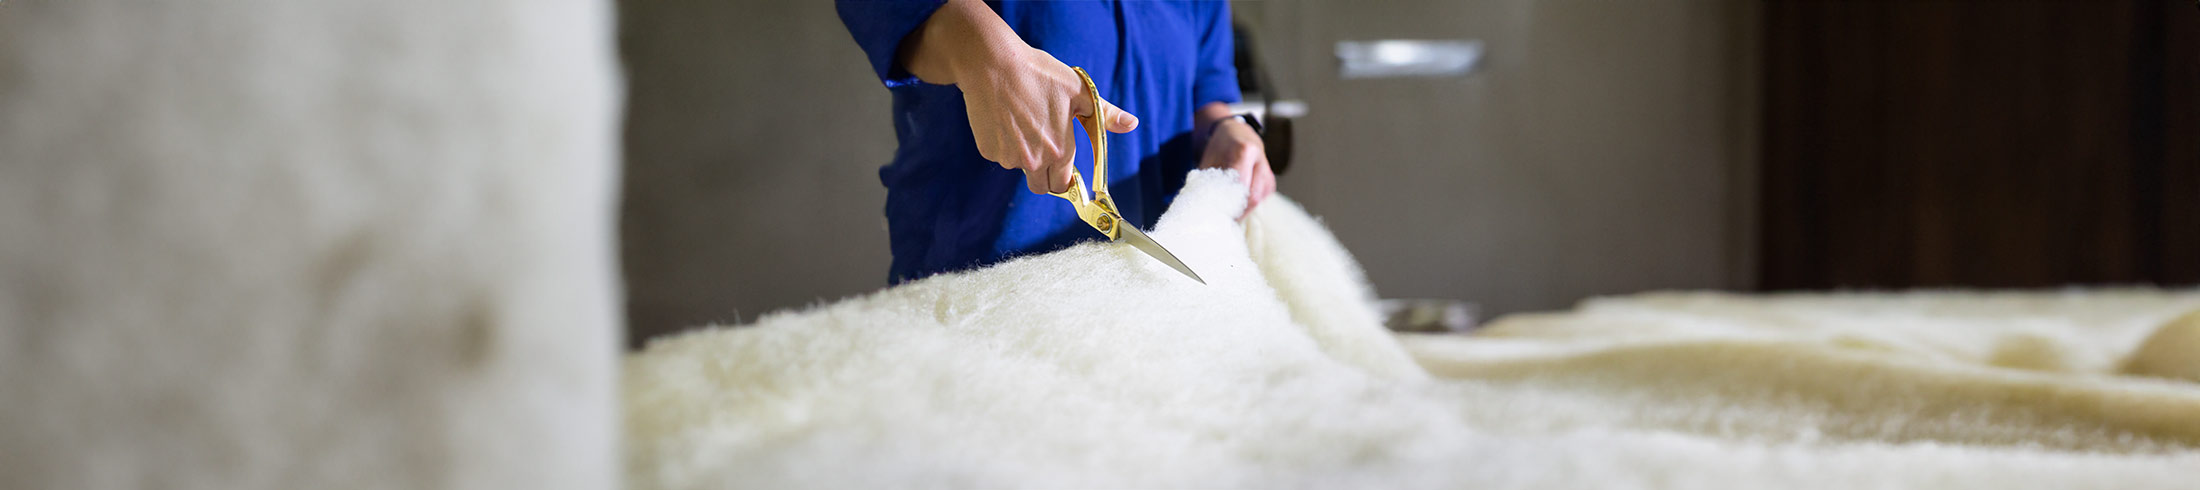 Artisan measuring fabric for bespoke bedding, embodying the precision and care in handmade UK products.